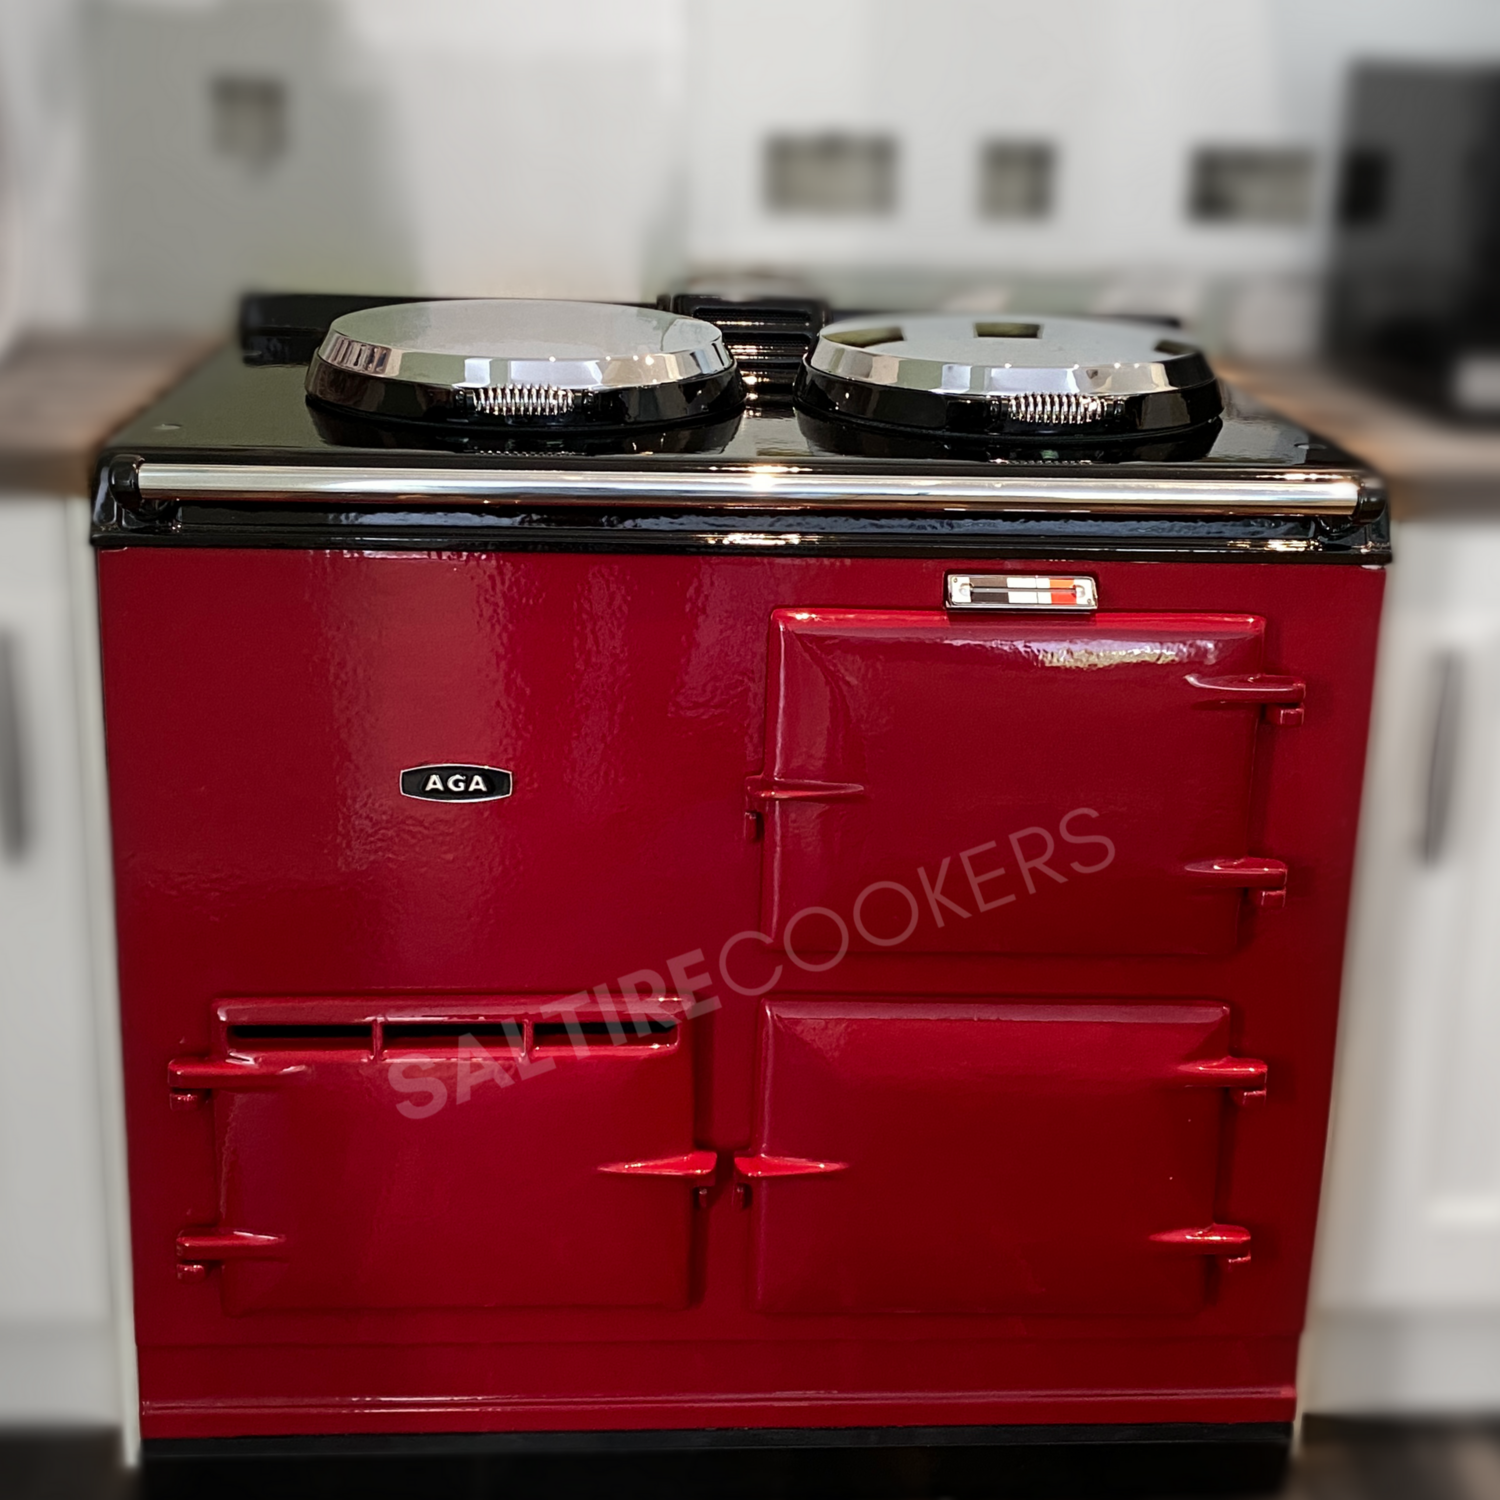 Reconditioned 2 Oven ElectricKit Aga Cooker (Claret)